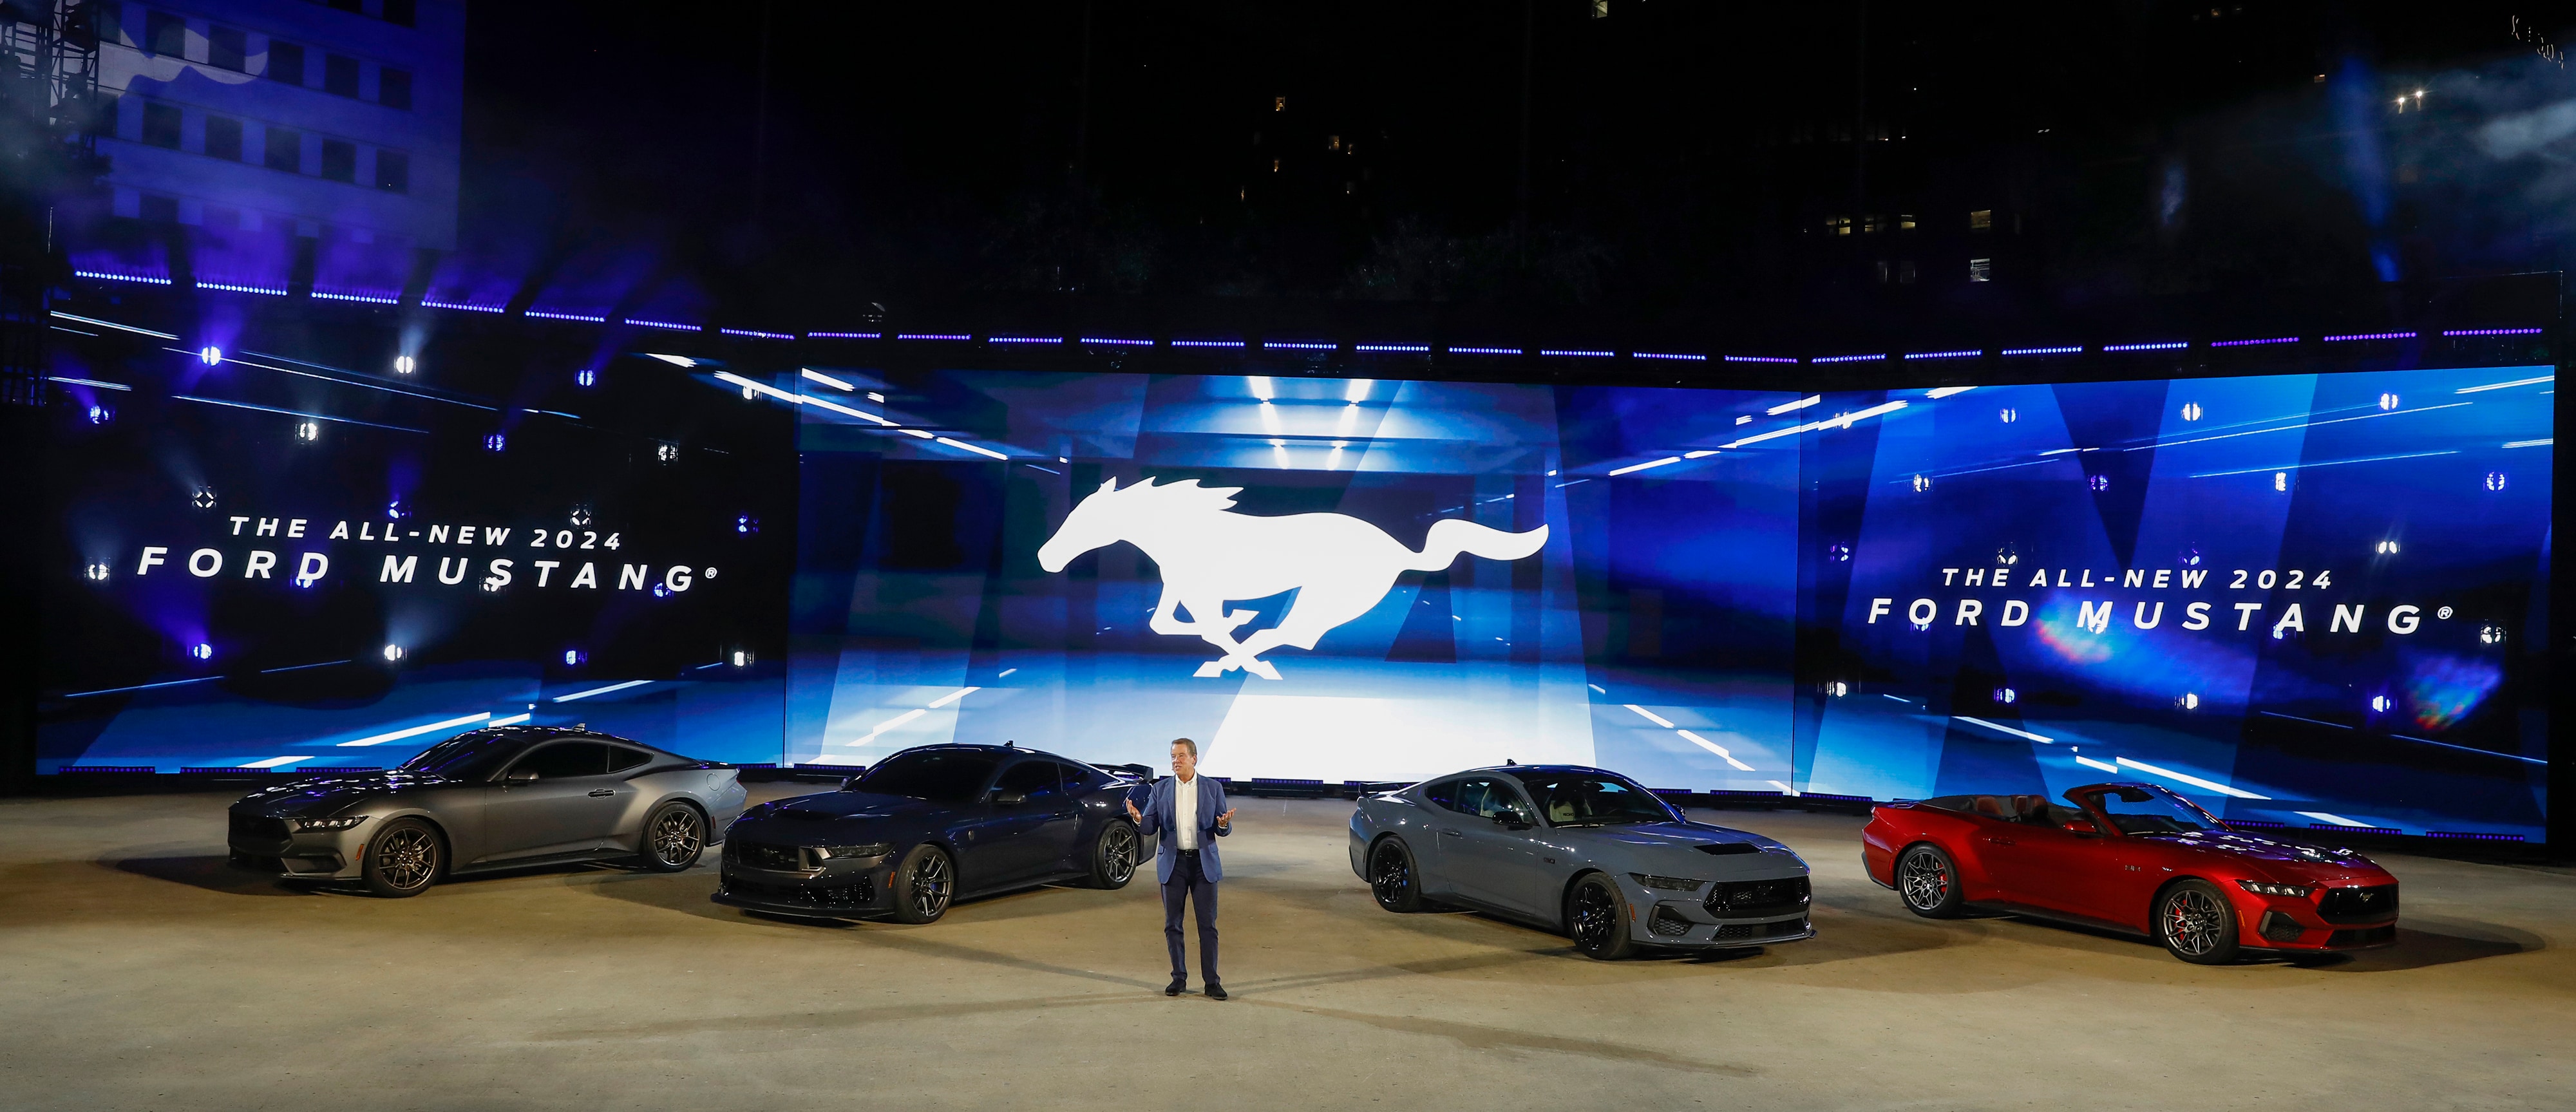 2024 Mustang Reveal Event Ford Media Center